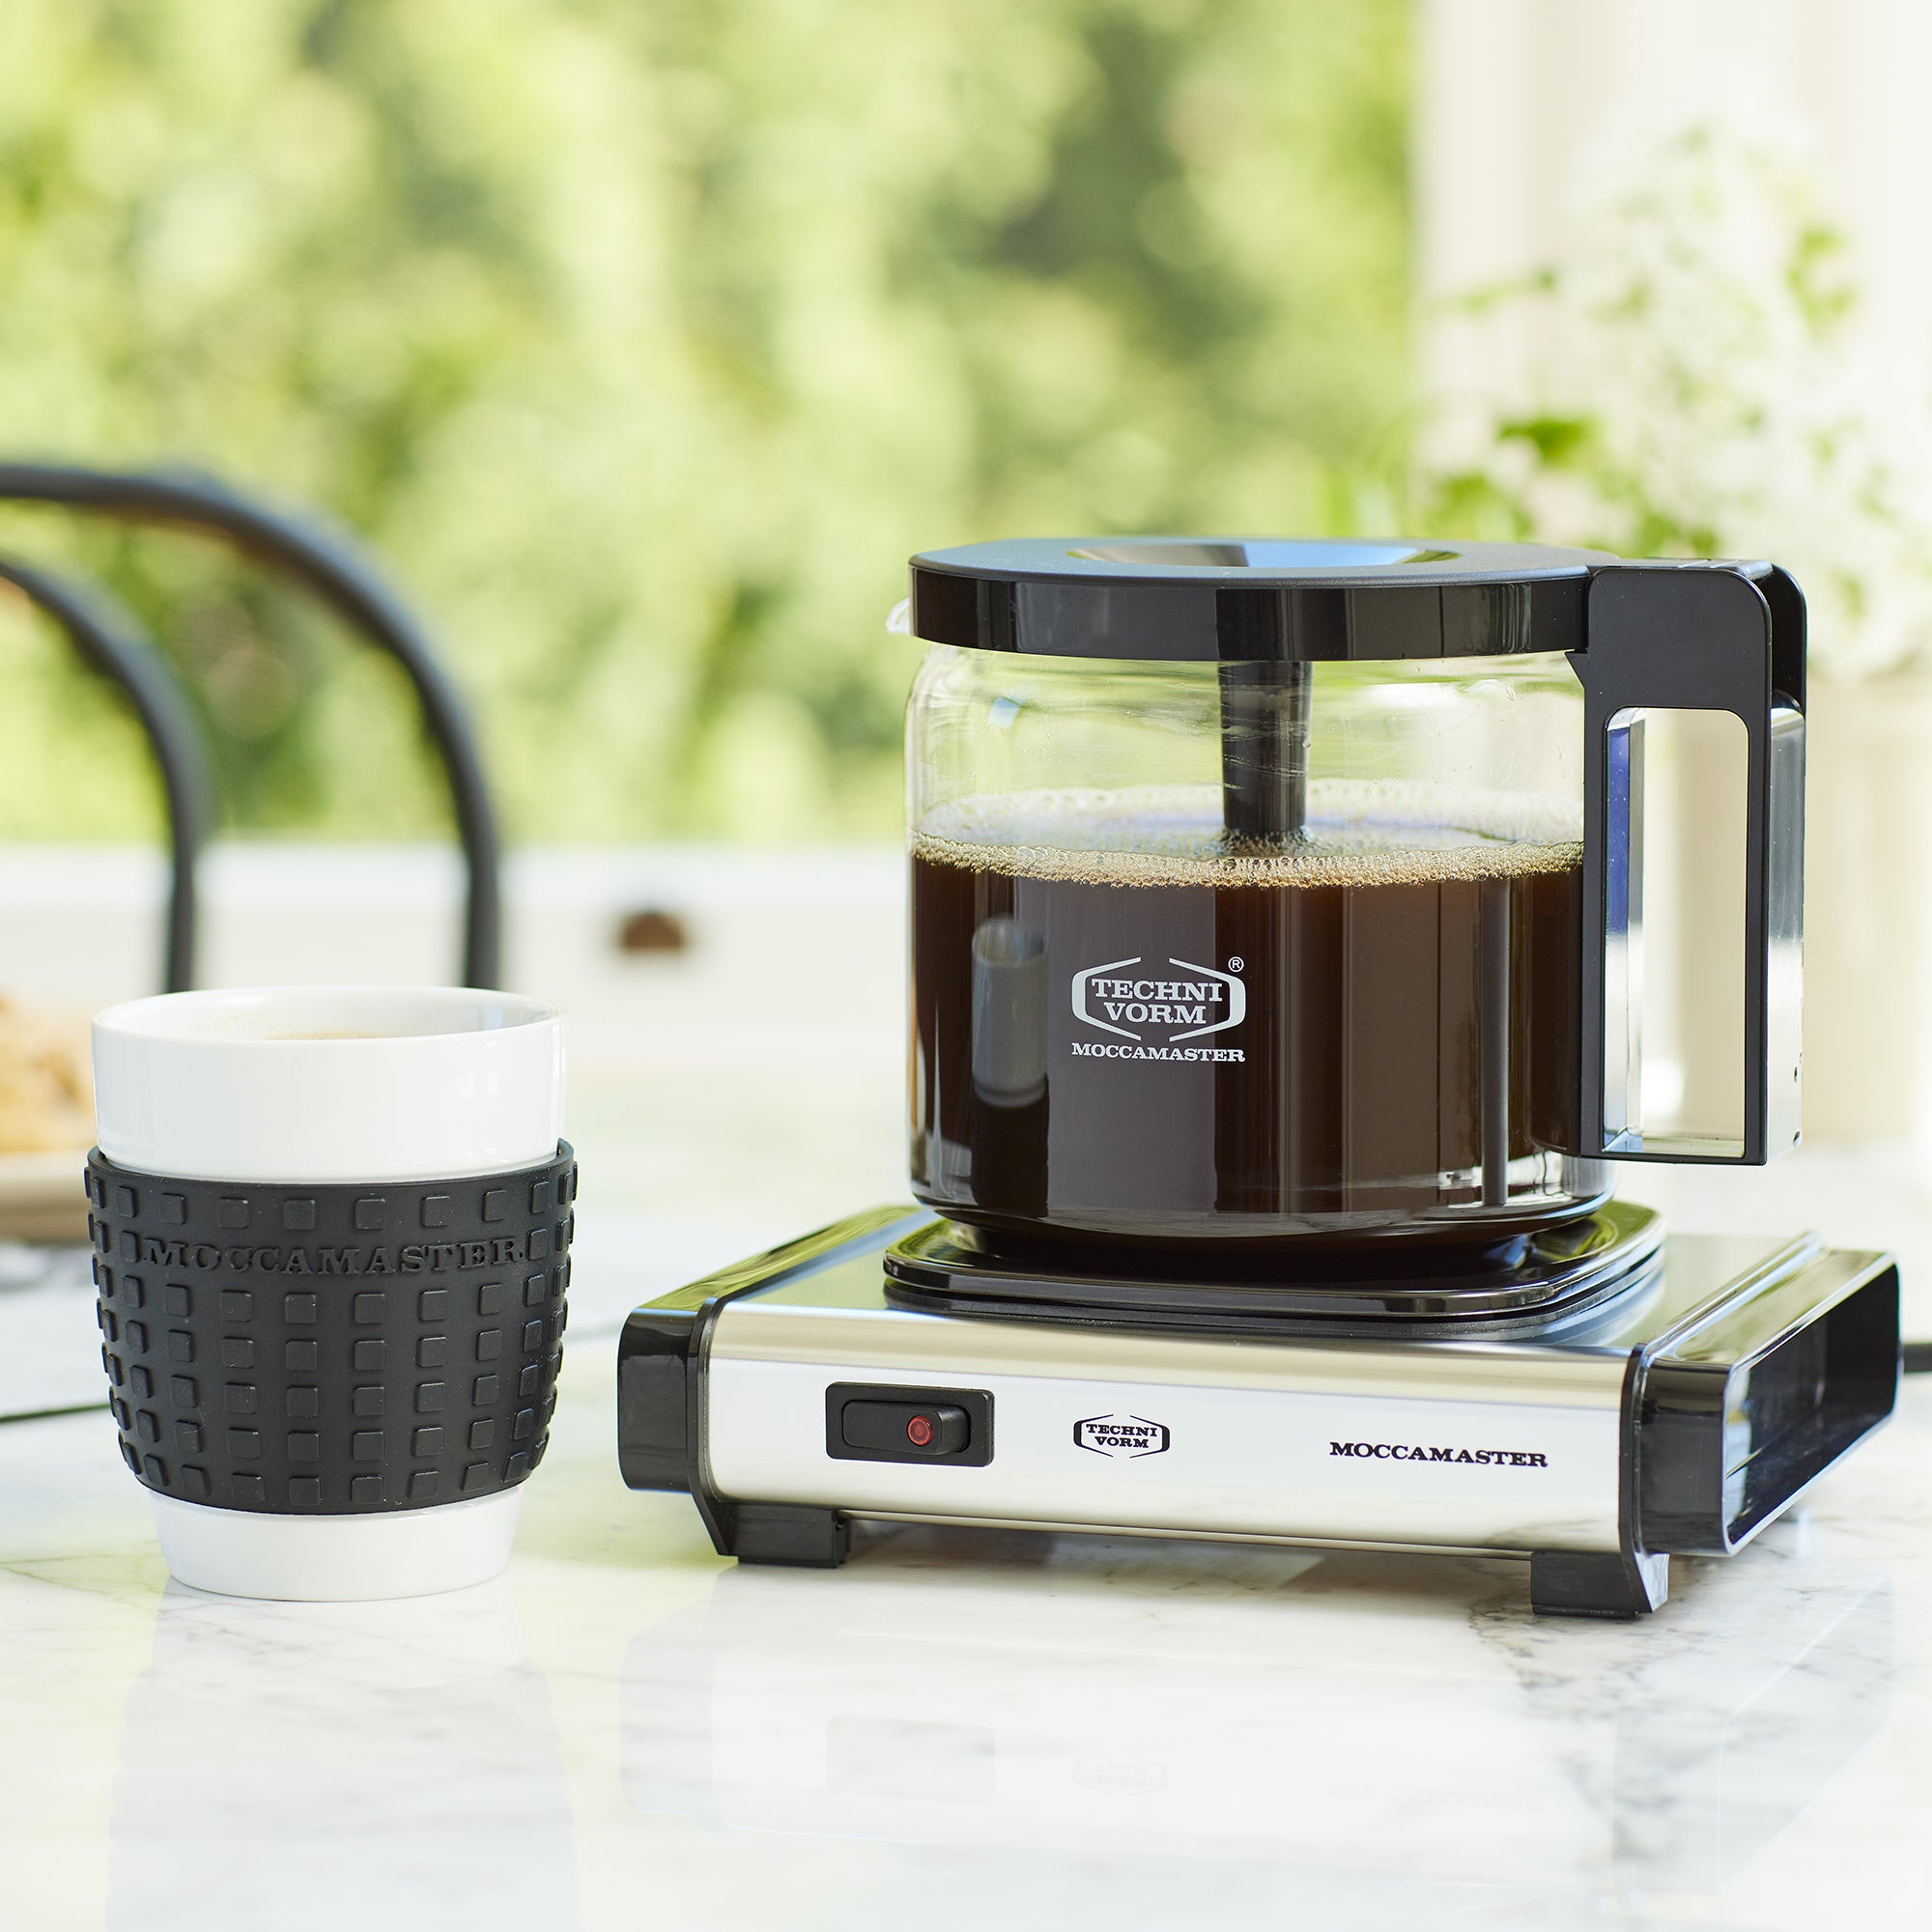 The Moccamaster Coffee Maker is 29% off today